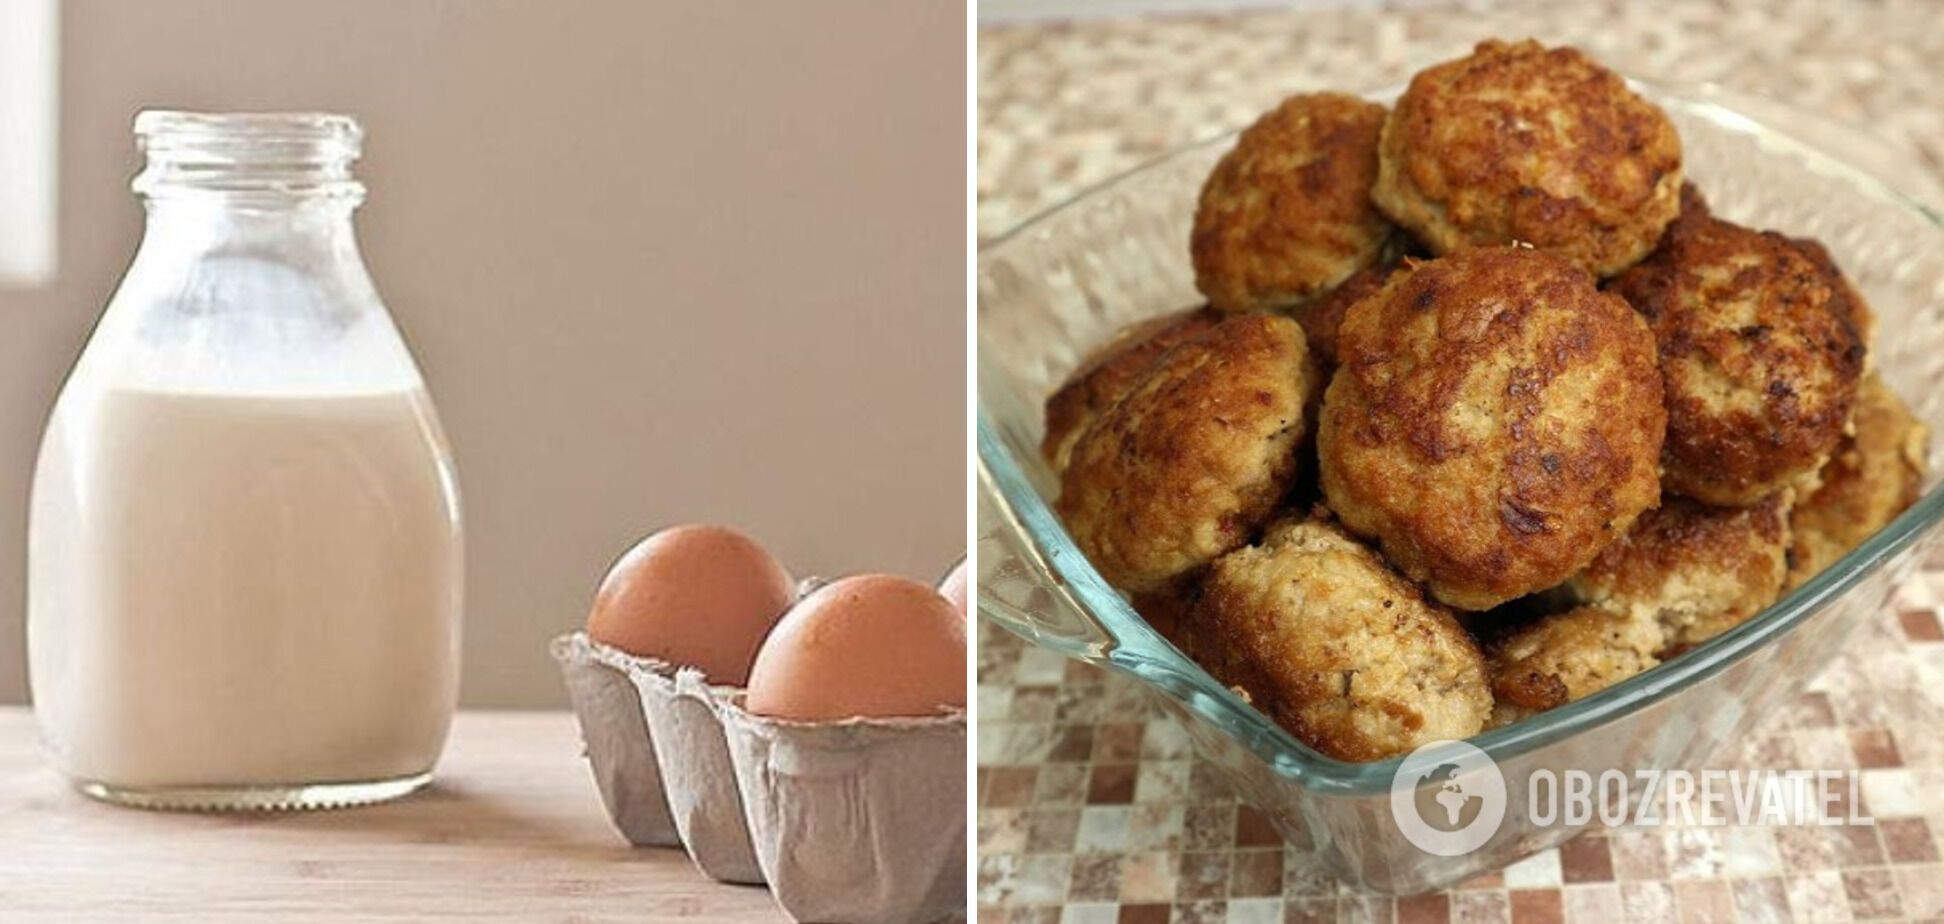 Can eggs and milk be added to cutlets